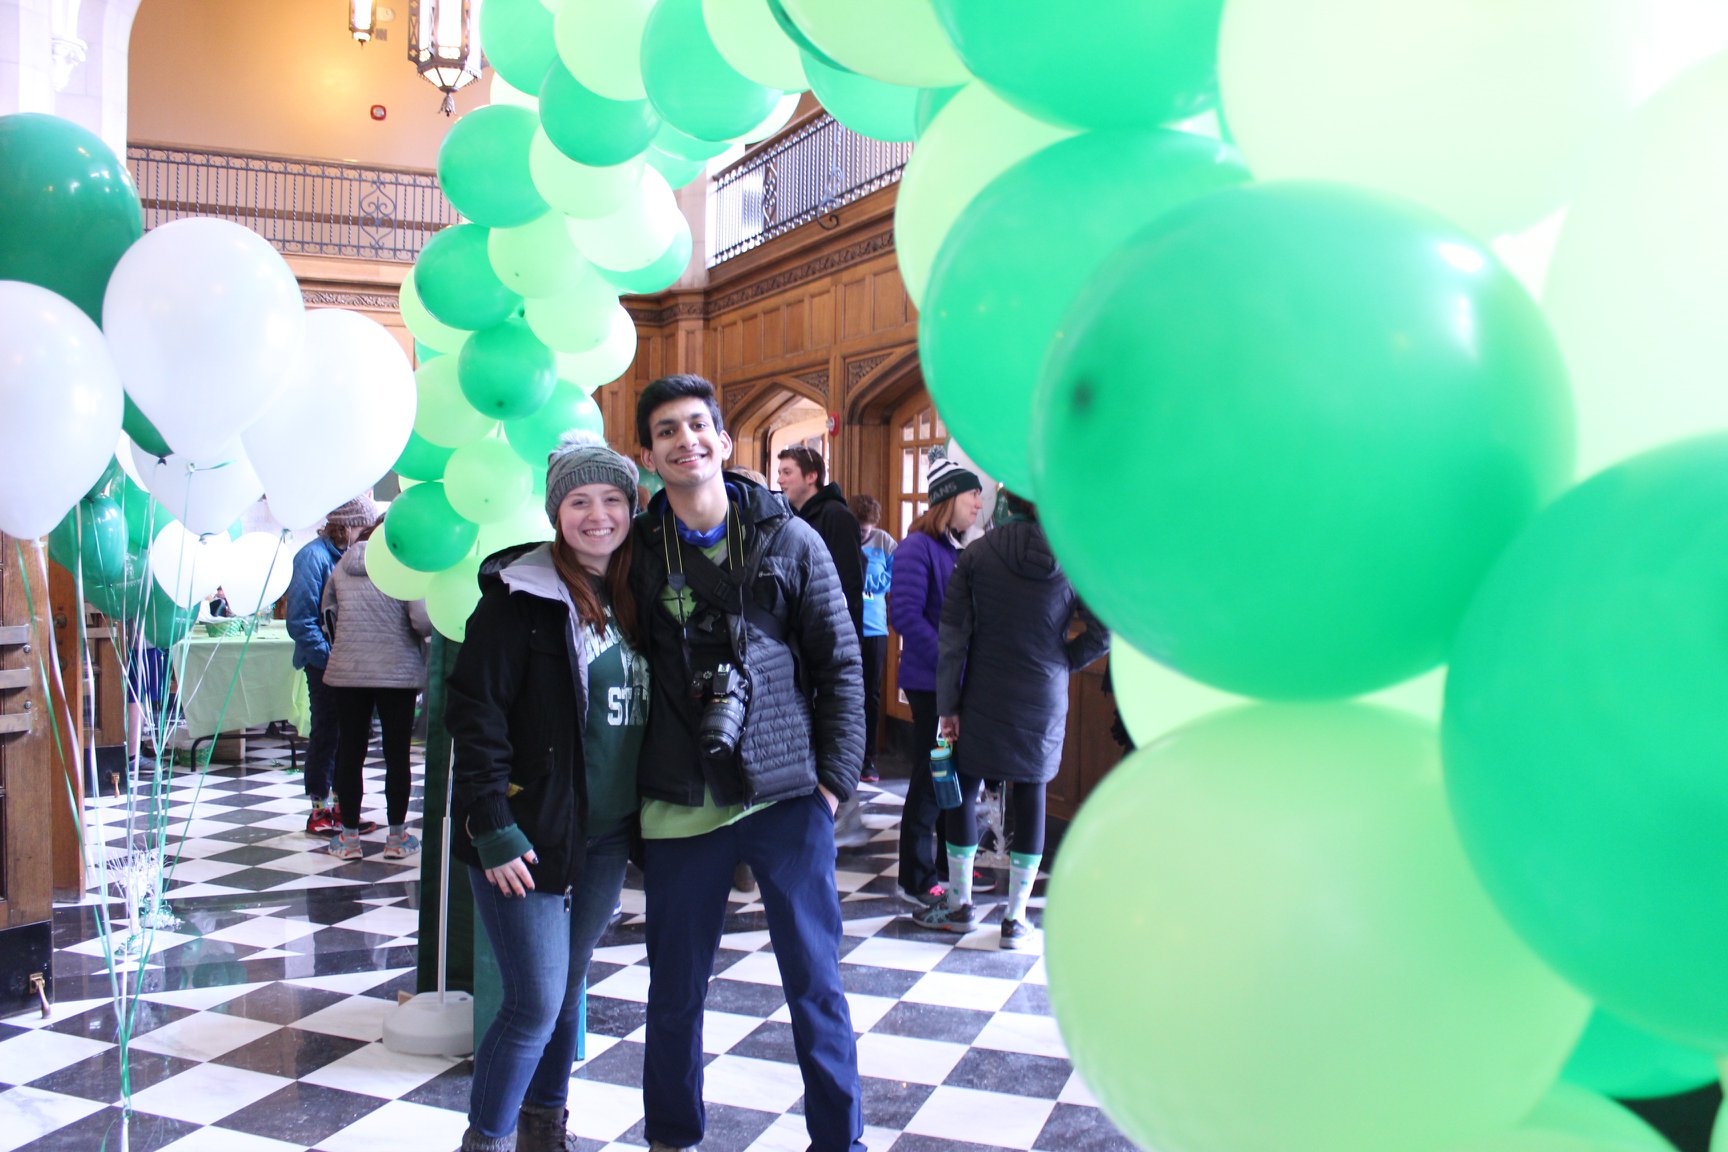 Two people smiling under an archway of green and white balloons